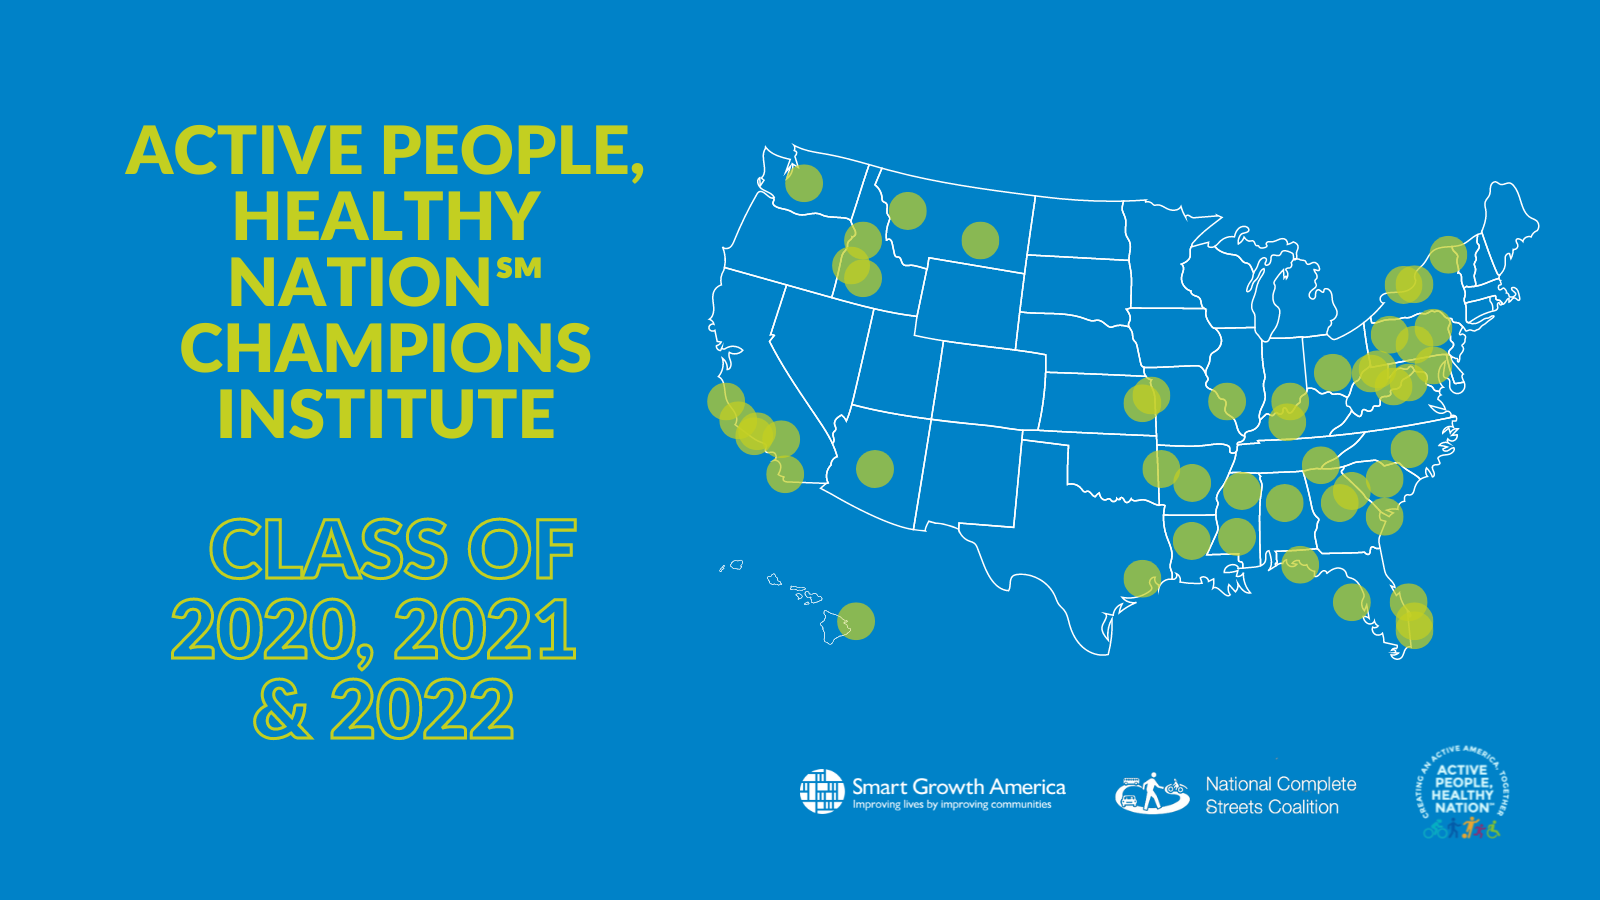 Three years of Champions: How the Complete Streets Champions Institute has made a difference